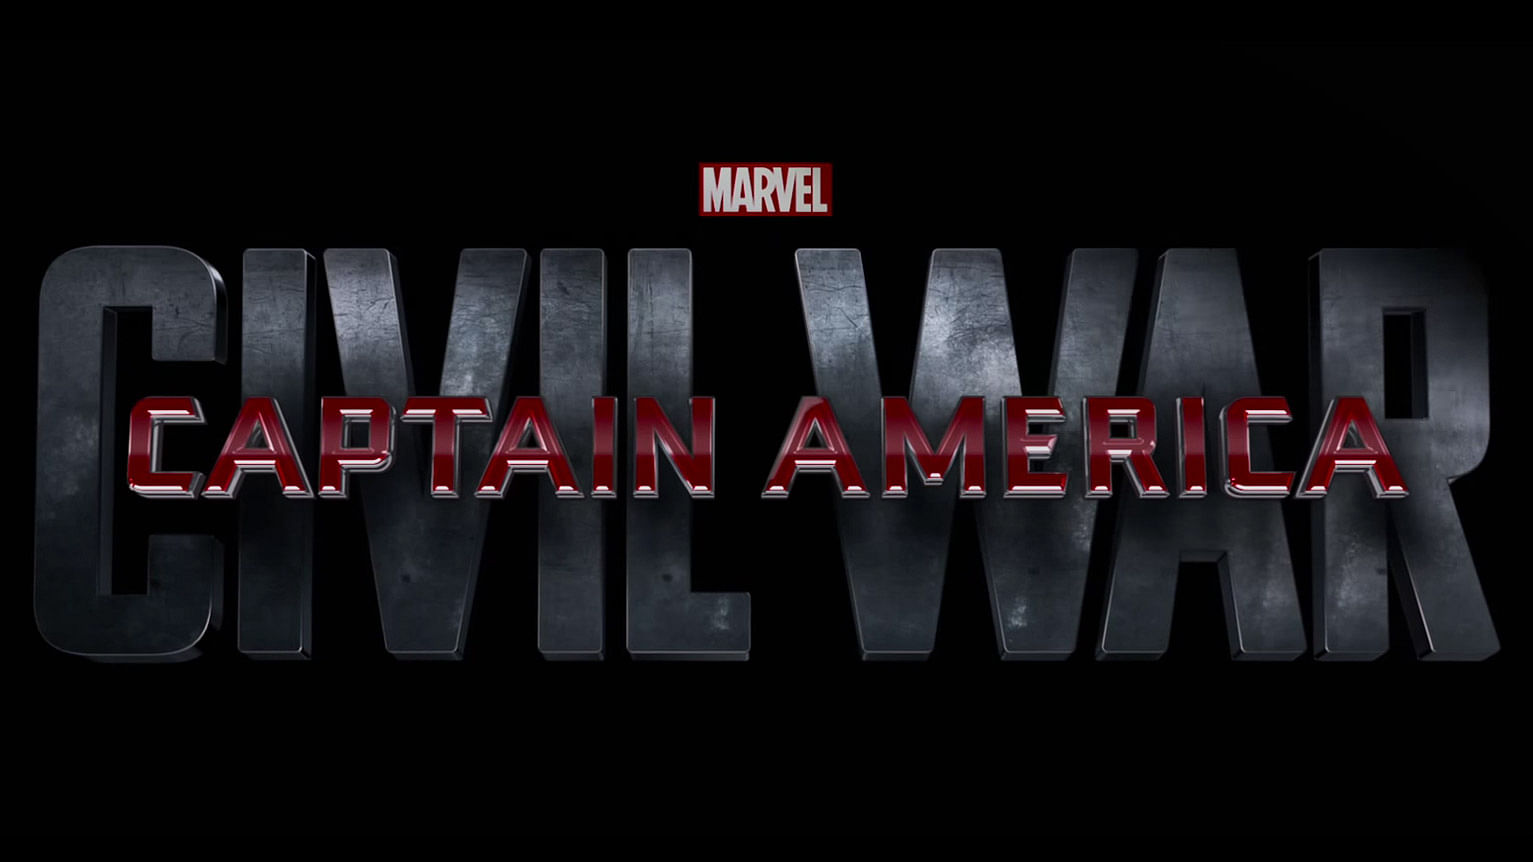 Screengrab of the poster of Captain America Civil War. (Photo: <a href="https://www.youtube.com/watch?v=uVdV-lxRPFo">YouTube</a> screengrab)